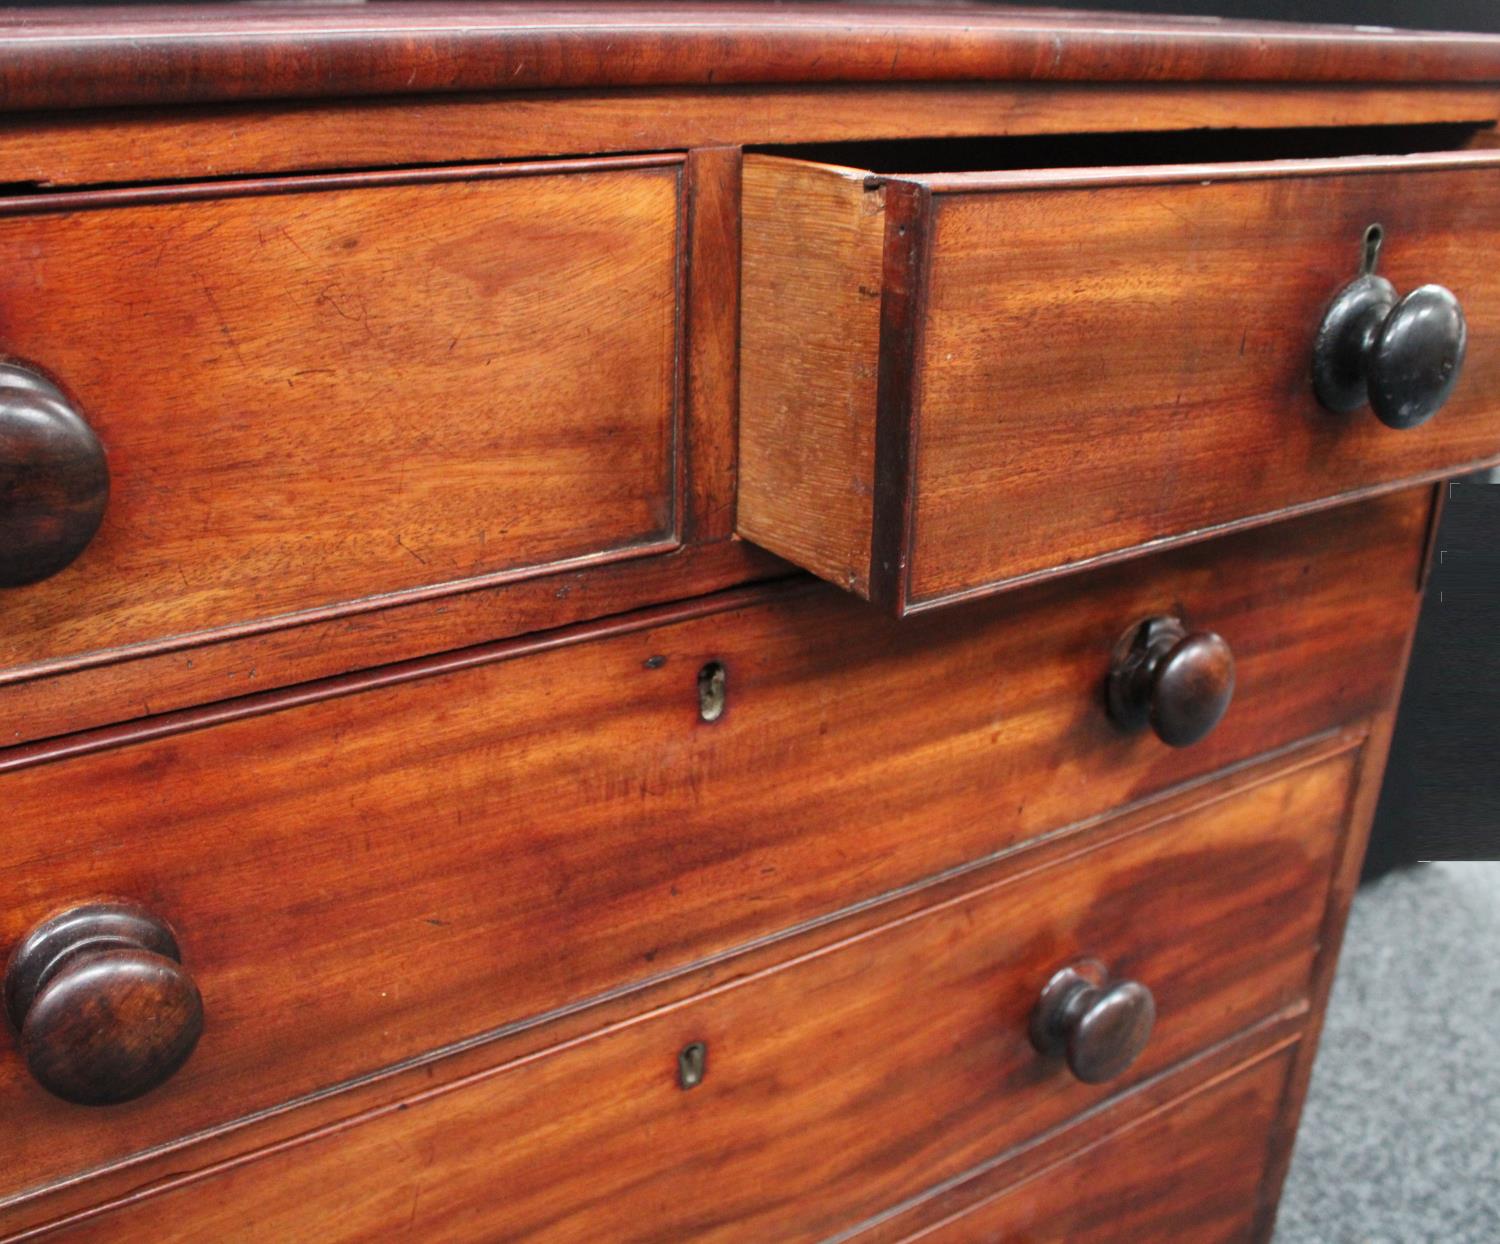 An early Victorian mahogany chest of drawers, c. - Image 6 of 7